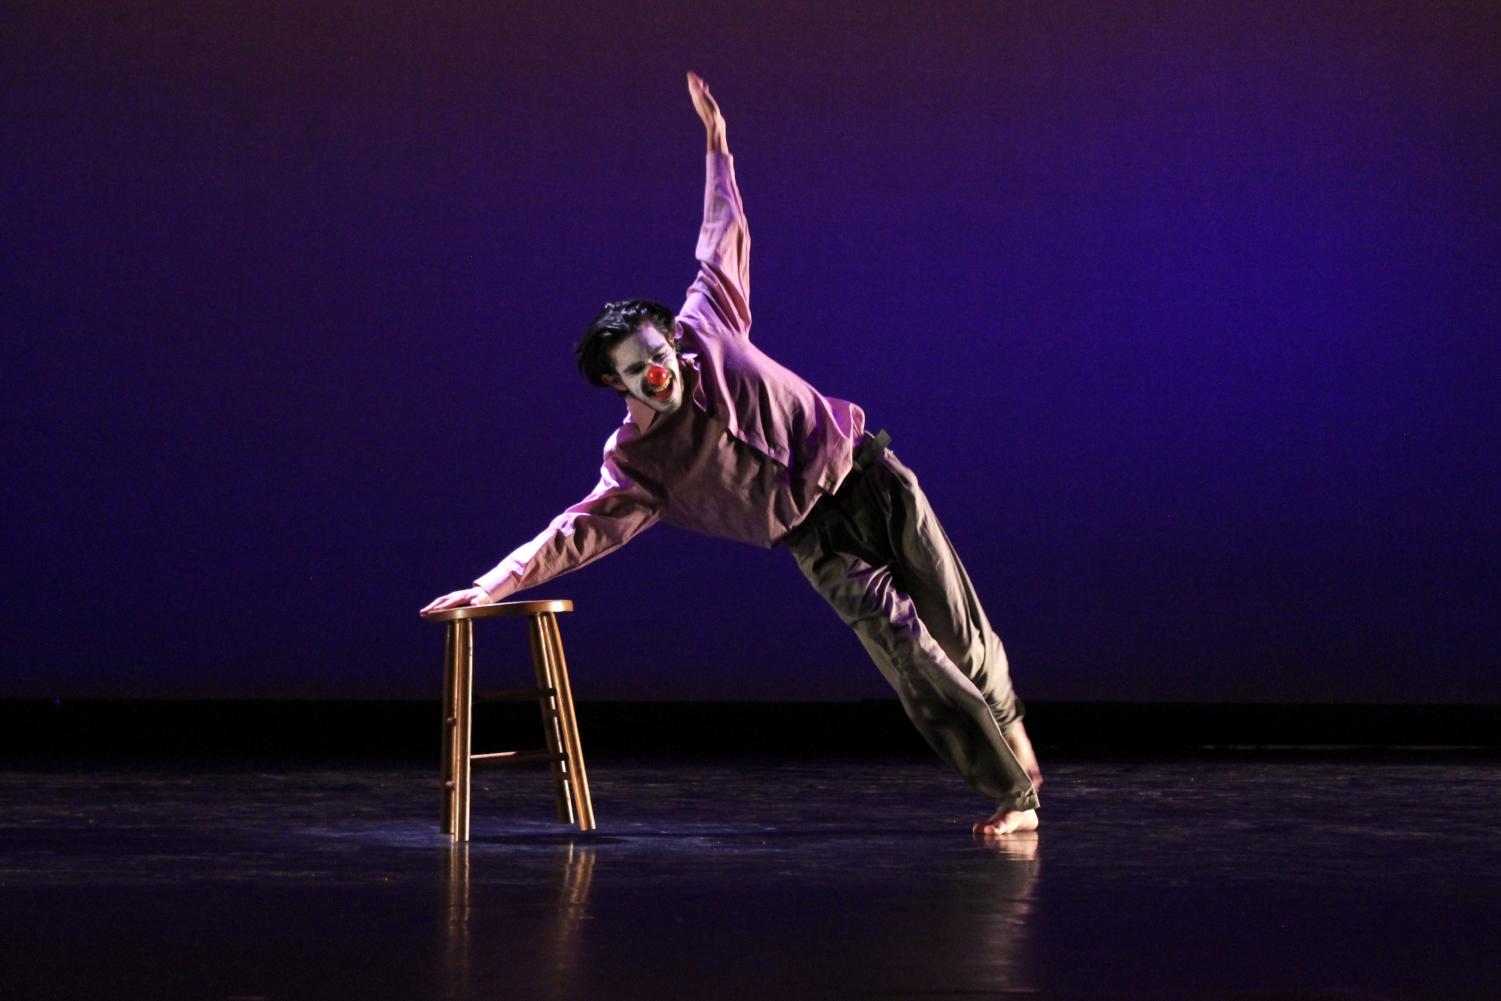 Theatre major Kyle Kaplan performs “Still Working On It,” a dance-comedy piece choreographed by Artistic Director Beth Megill at the “Speaking Movement” dress rehearsal on Nov. 16, 2022.